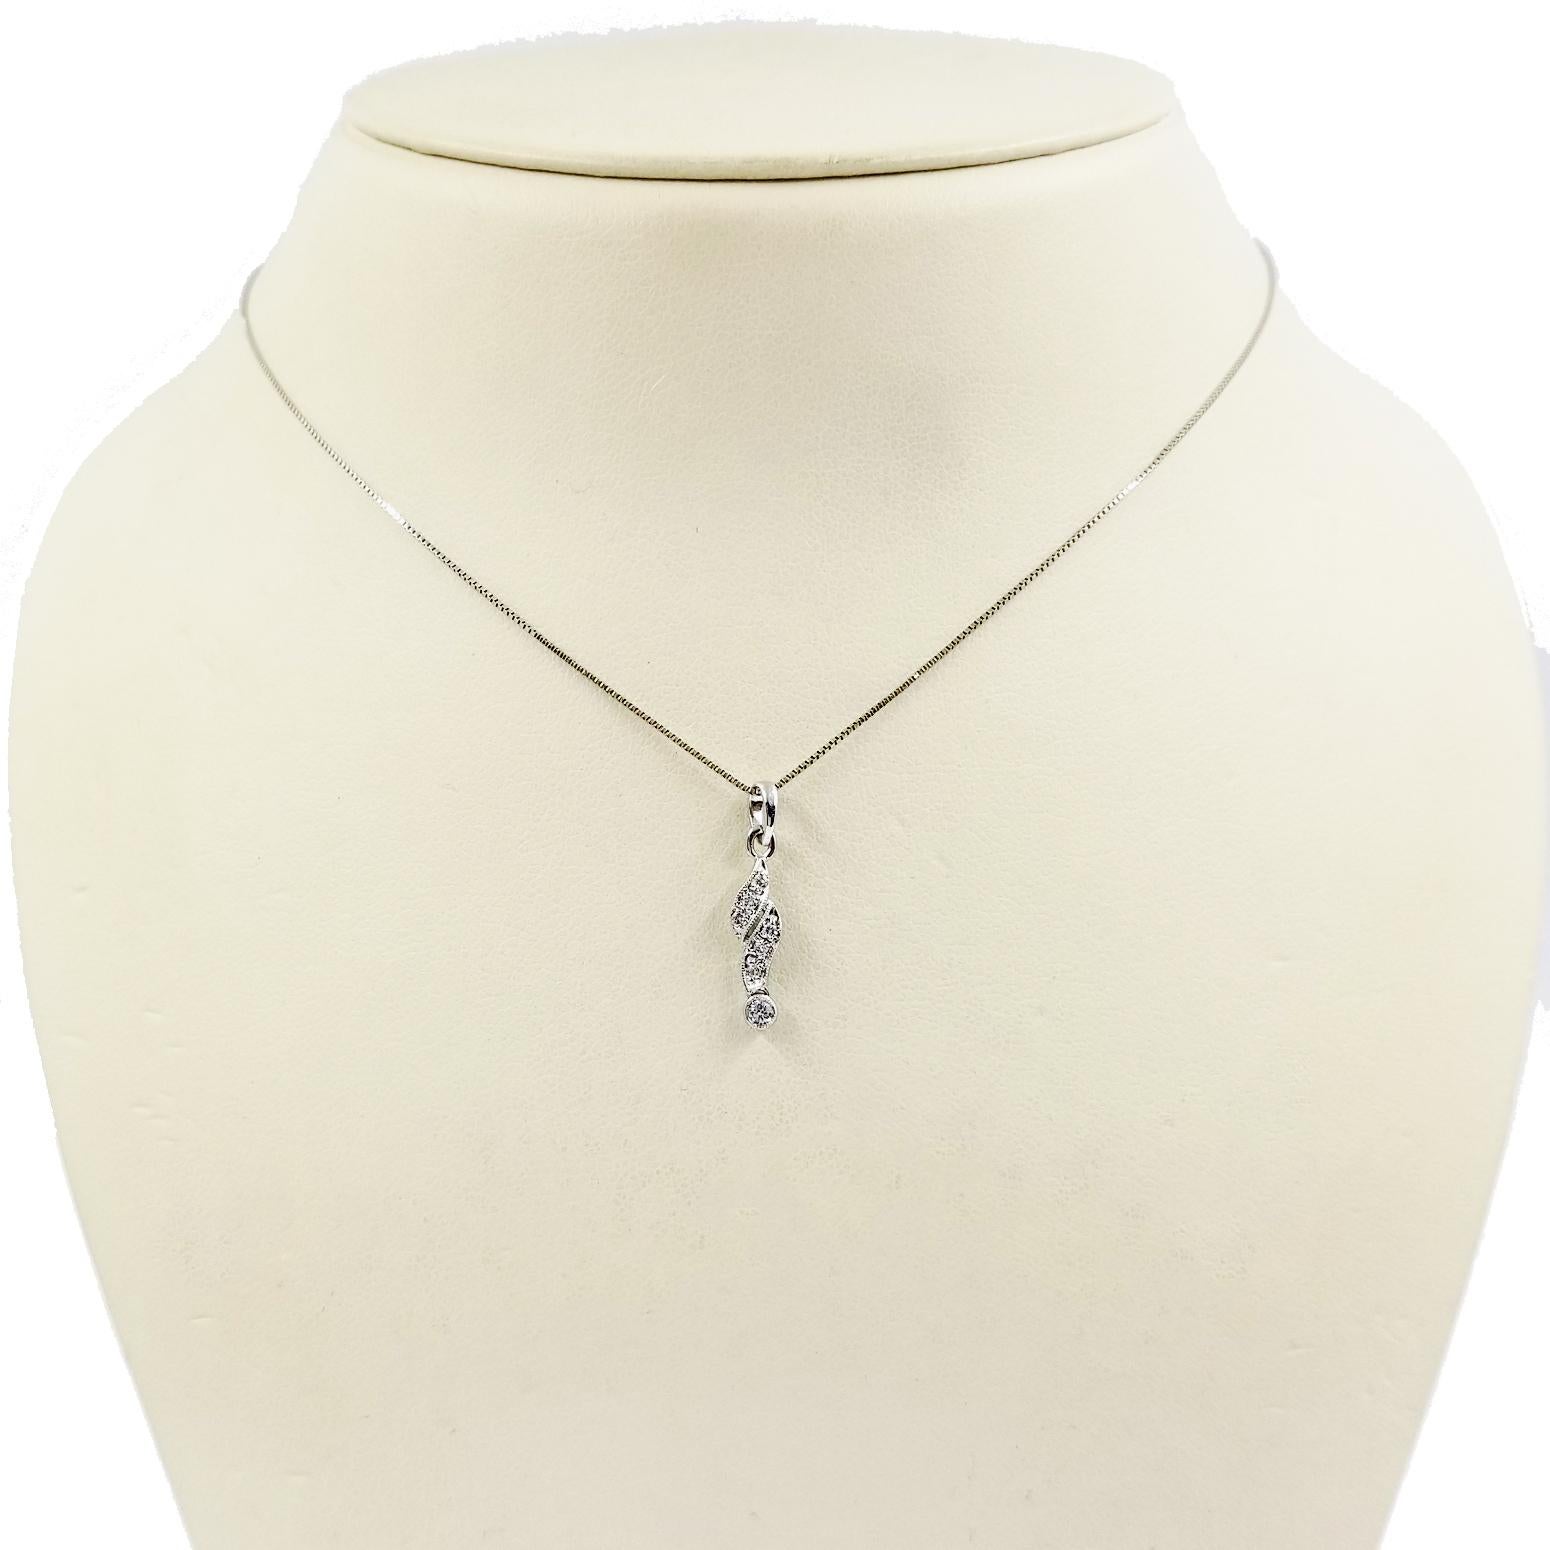 14 Karat White Gold Necklace Featuring A 7 Diamond Sliding Pendant Totaling 0.05 Carat with Beaded Milgrain Accents. 16 Inch Long Box Chain. Finished Weight is 1.5 Grams.